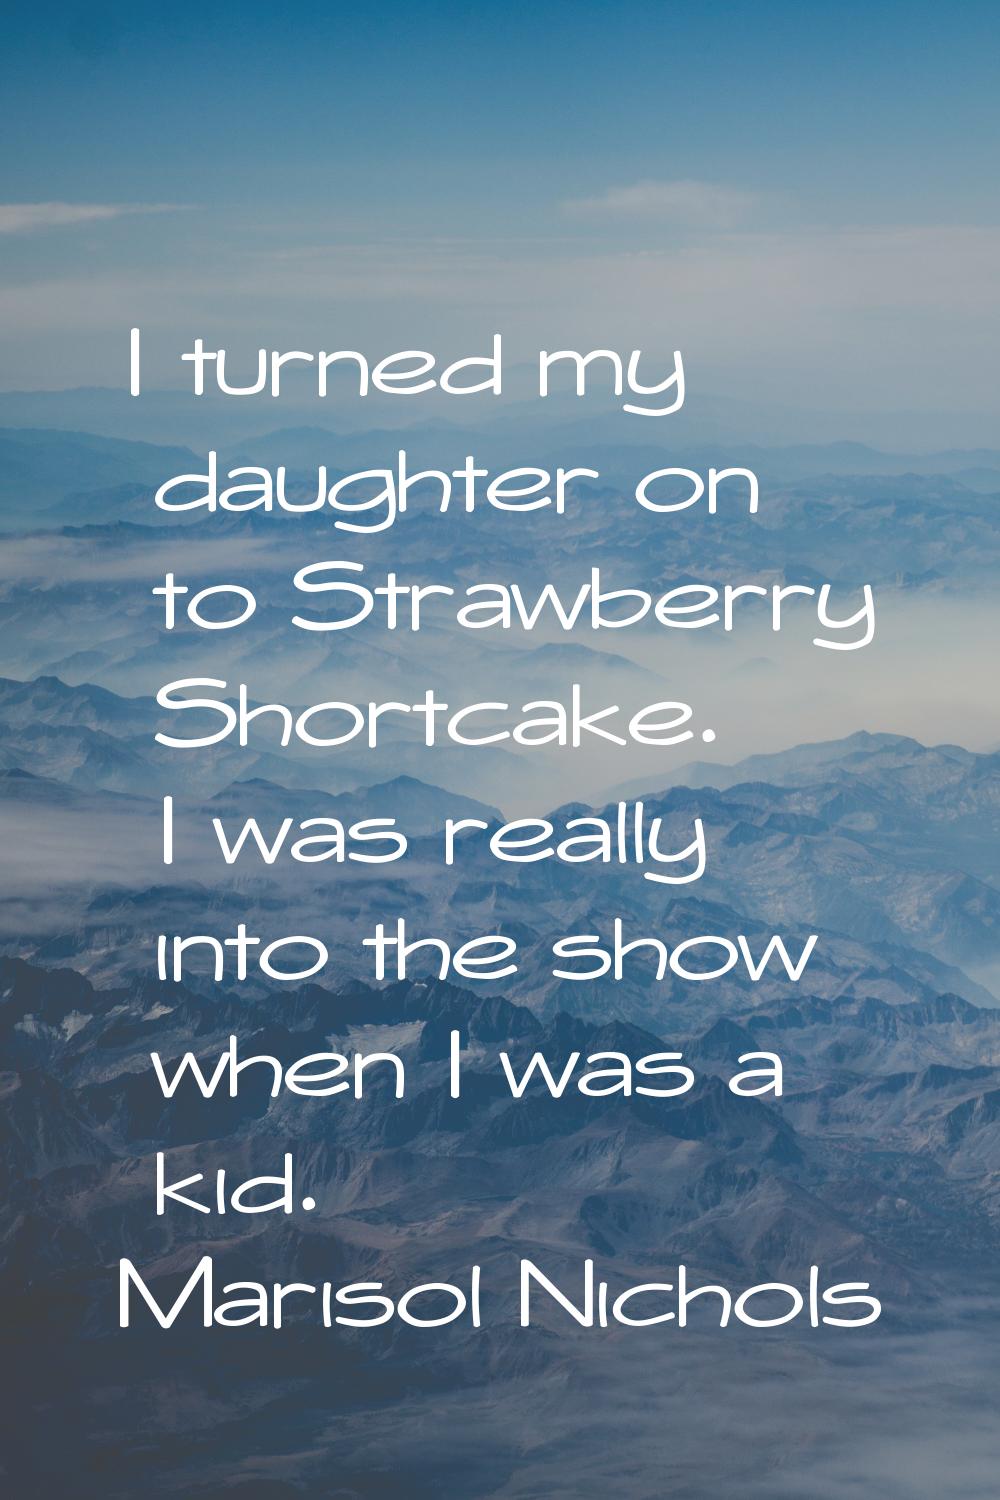 I turned my daughter on to Strawberry Shortcake. I was really into the show when I was a kid.